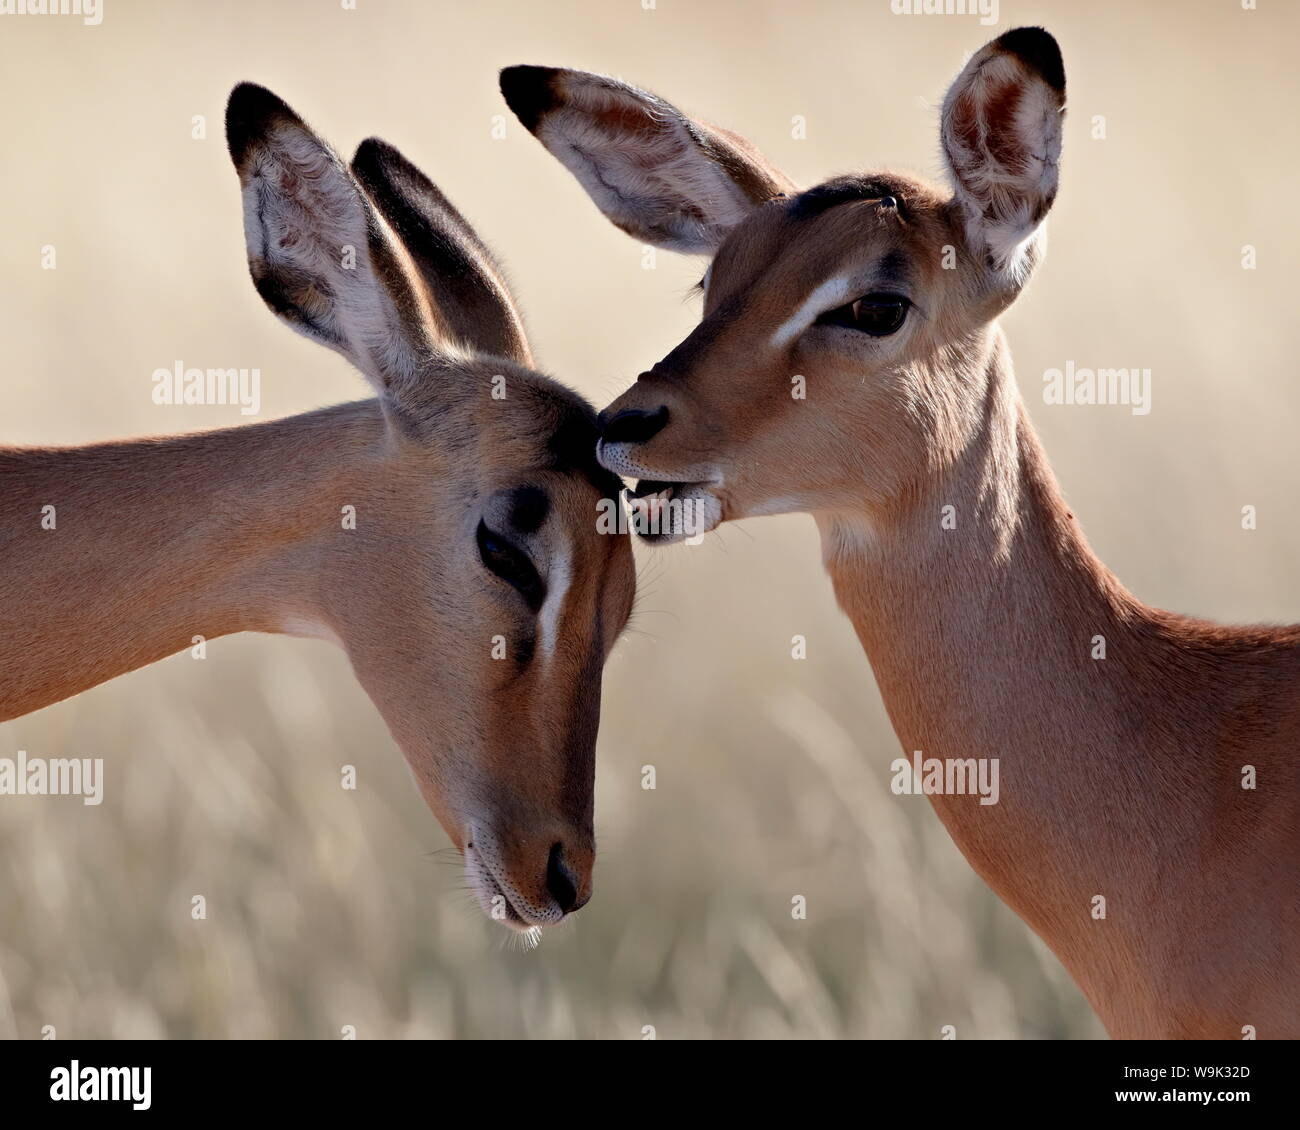 Two young impala (Aepyceros melampus) grooming, Kruger National Park, South Africa, Africa Stock Photo